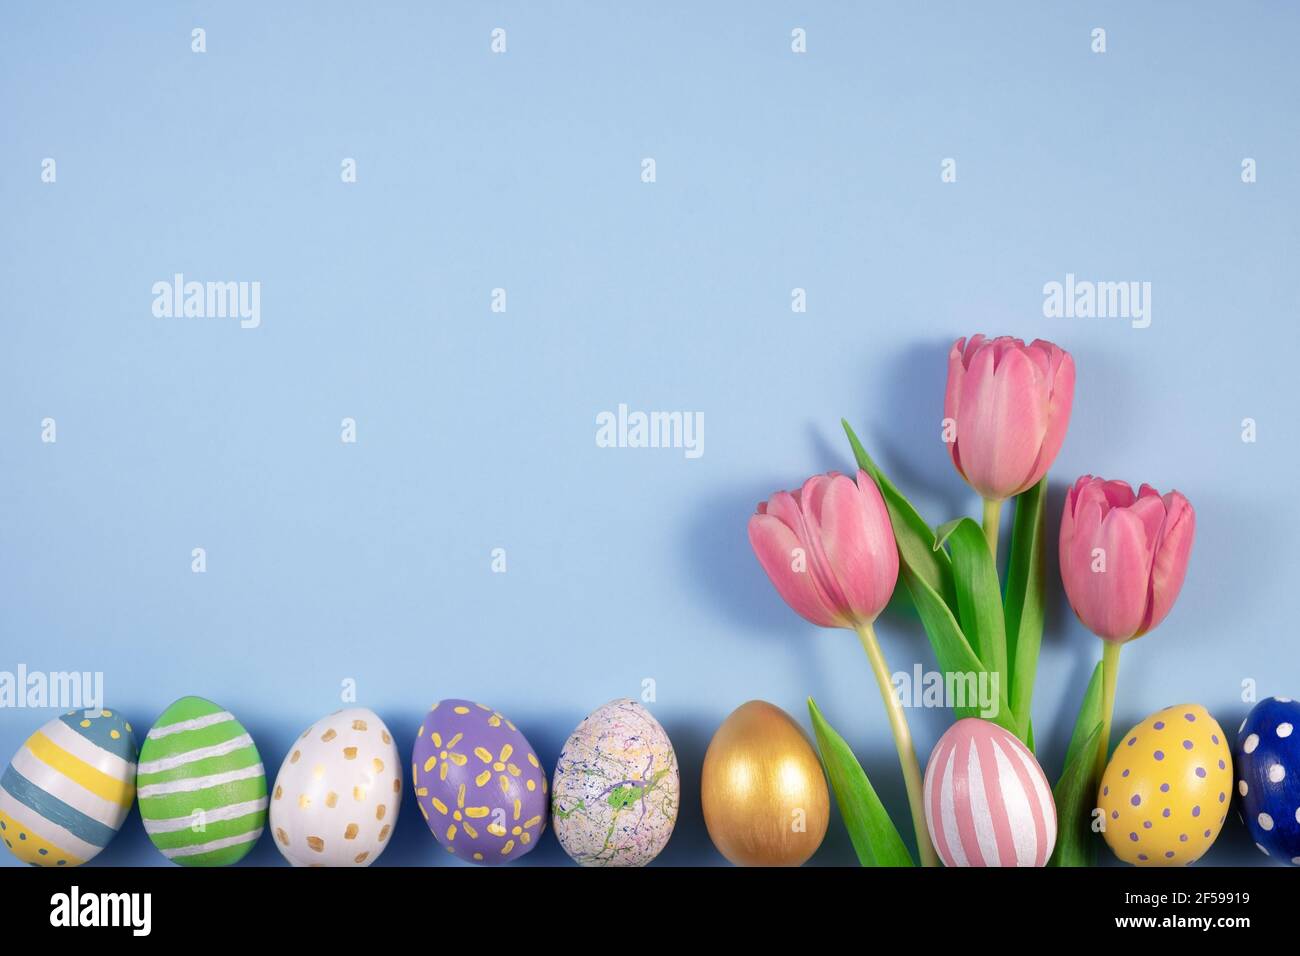 Pink tulips flowers and colourful eggs on blue background. Card for Happy Easter. Waiting for spring. Greeting card. Hello spring and easter concept. Stock Photo